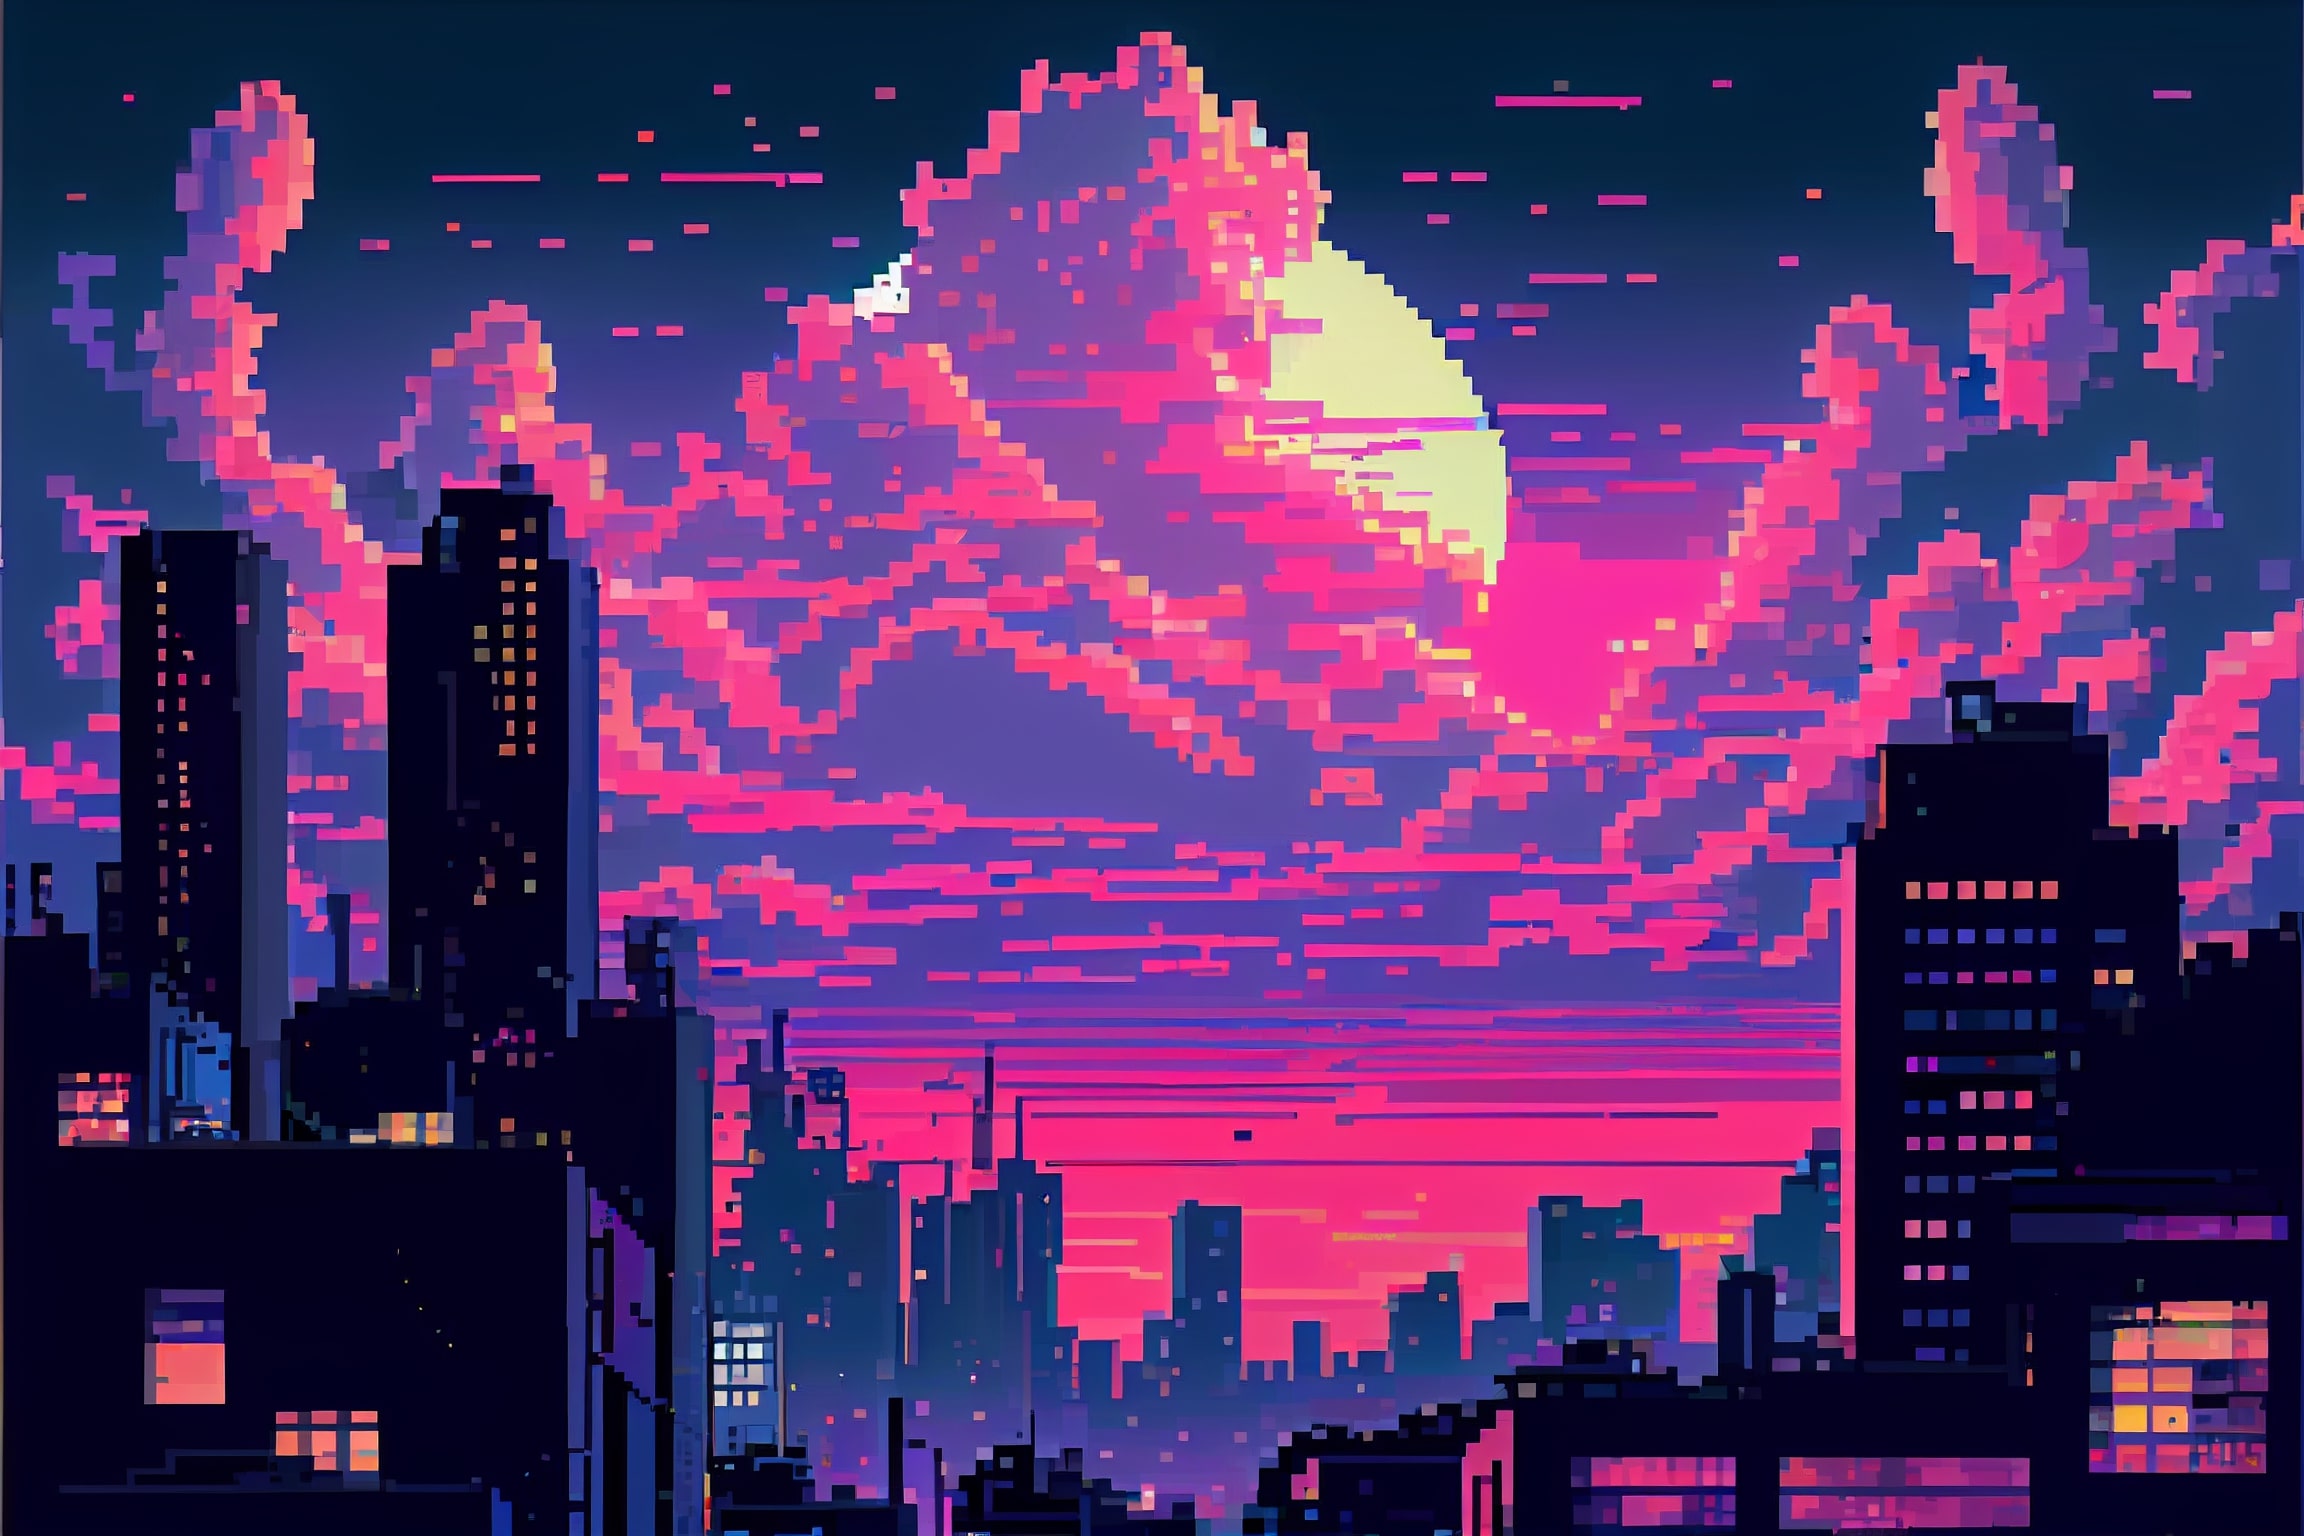 Pixel art picture of a city at night.